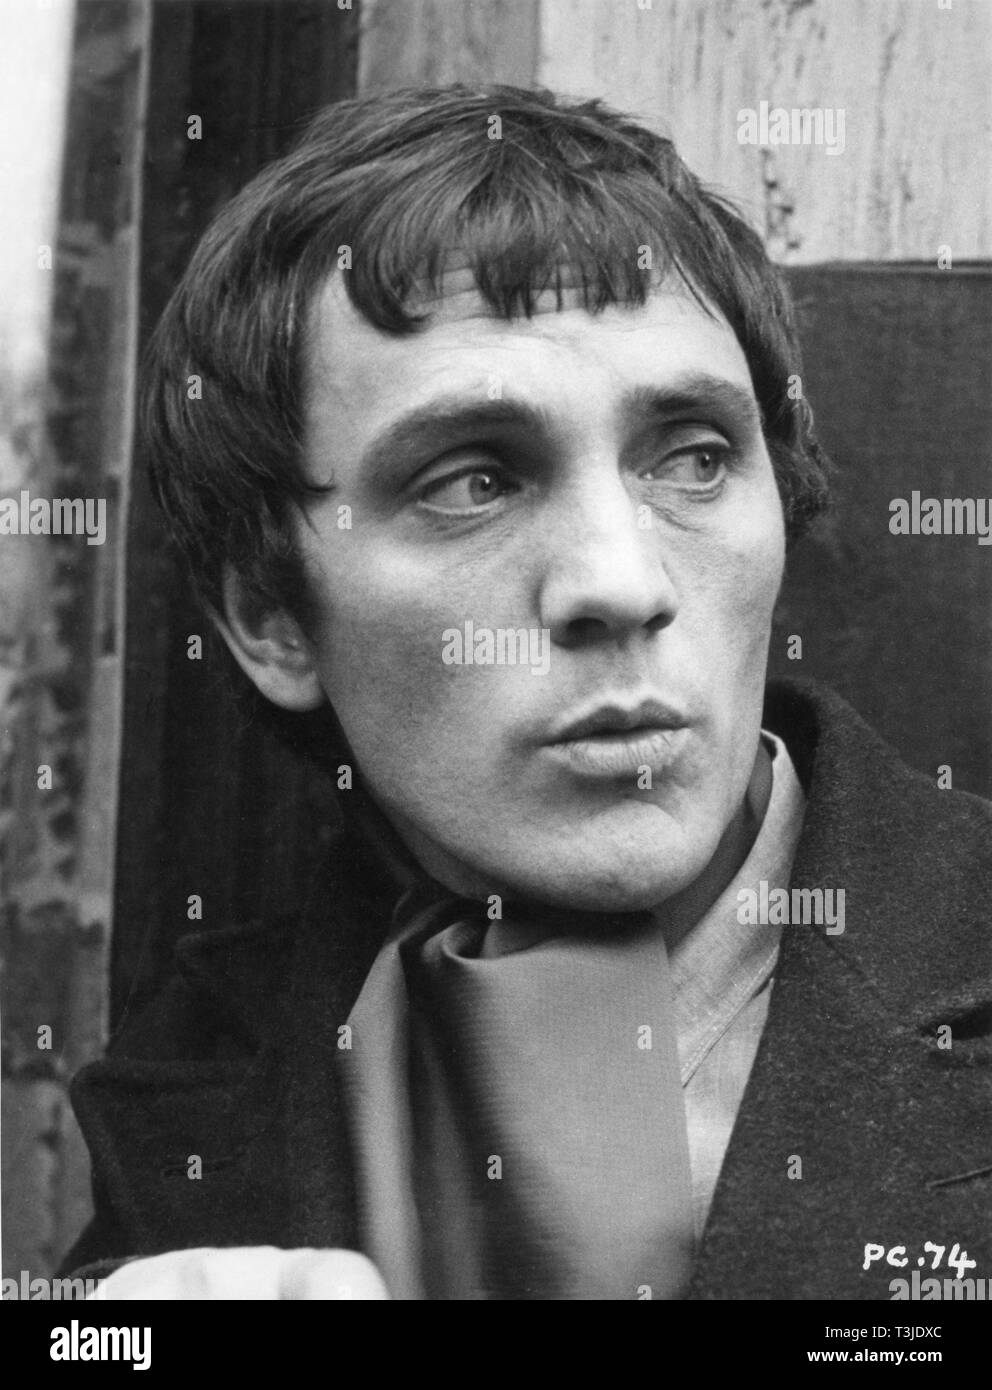 Terence Stamp portrait POOR COW 1967 director Ken Loach  Vic Films Productions / Fenchurch / The National Film Finance Corp. / Anglo - Amalgamated Film Distributors Stock Photo